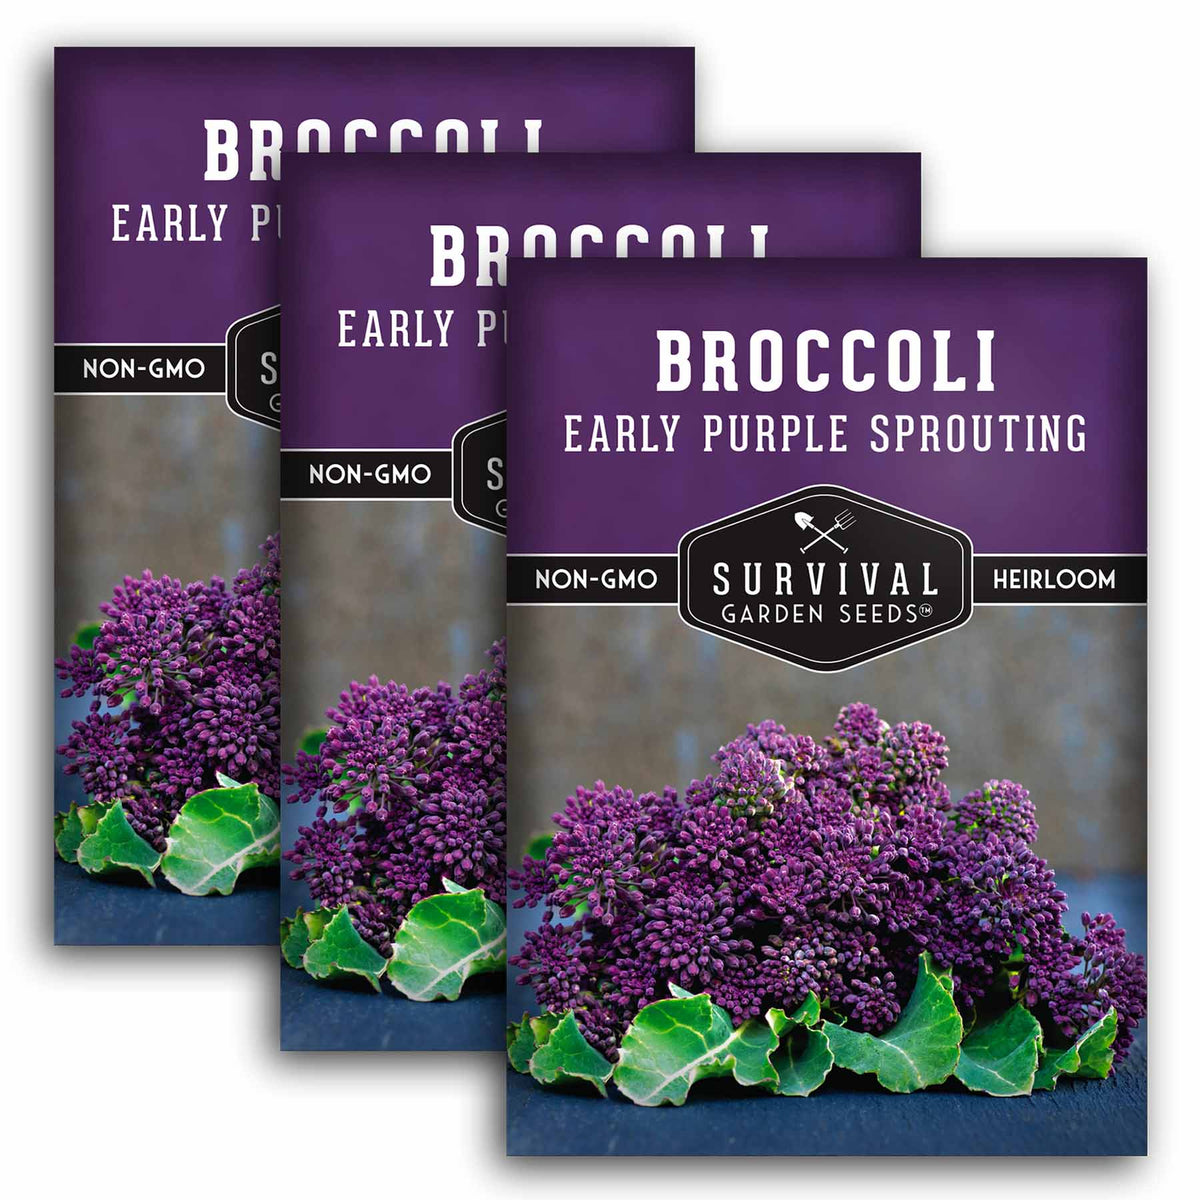 3 packets of Early Purple Sprouting Broccoli seeds